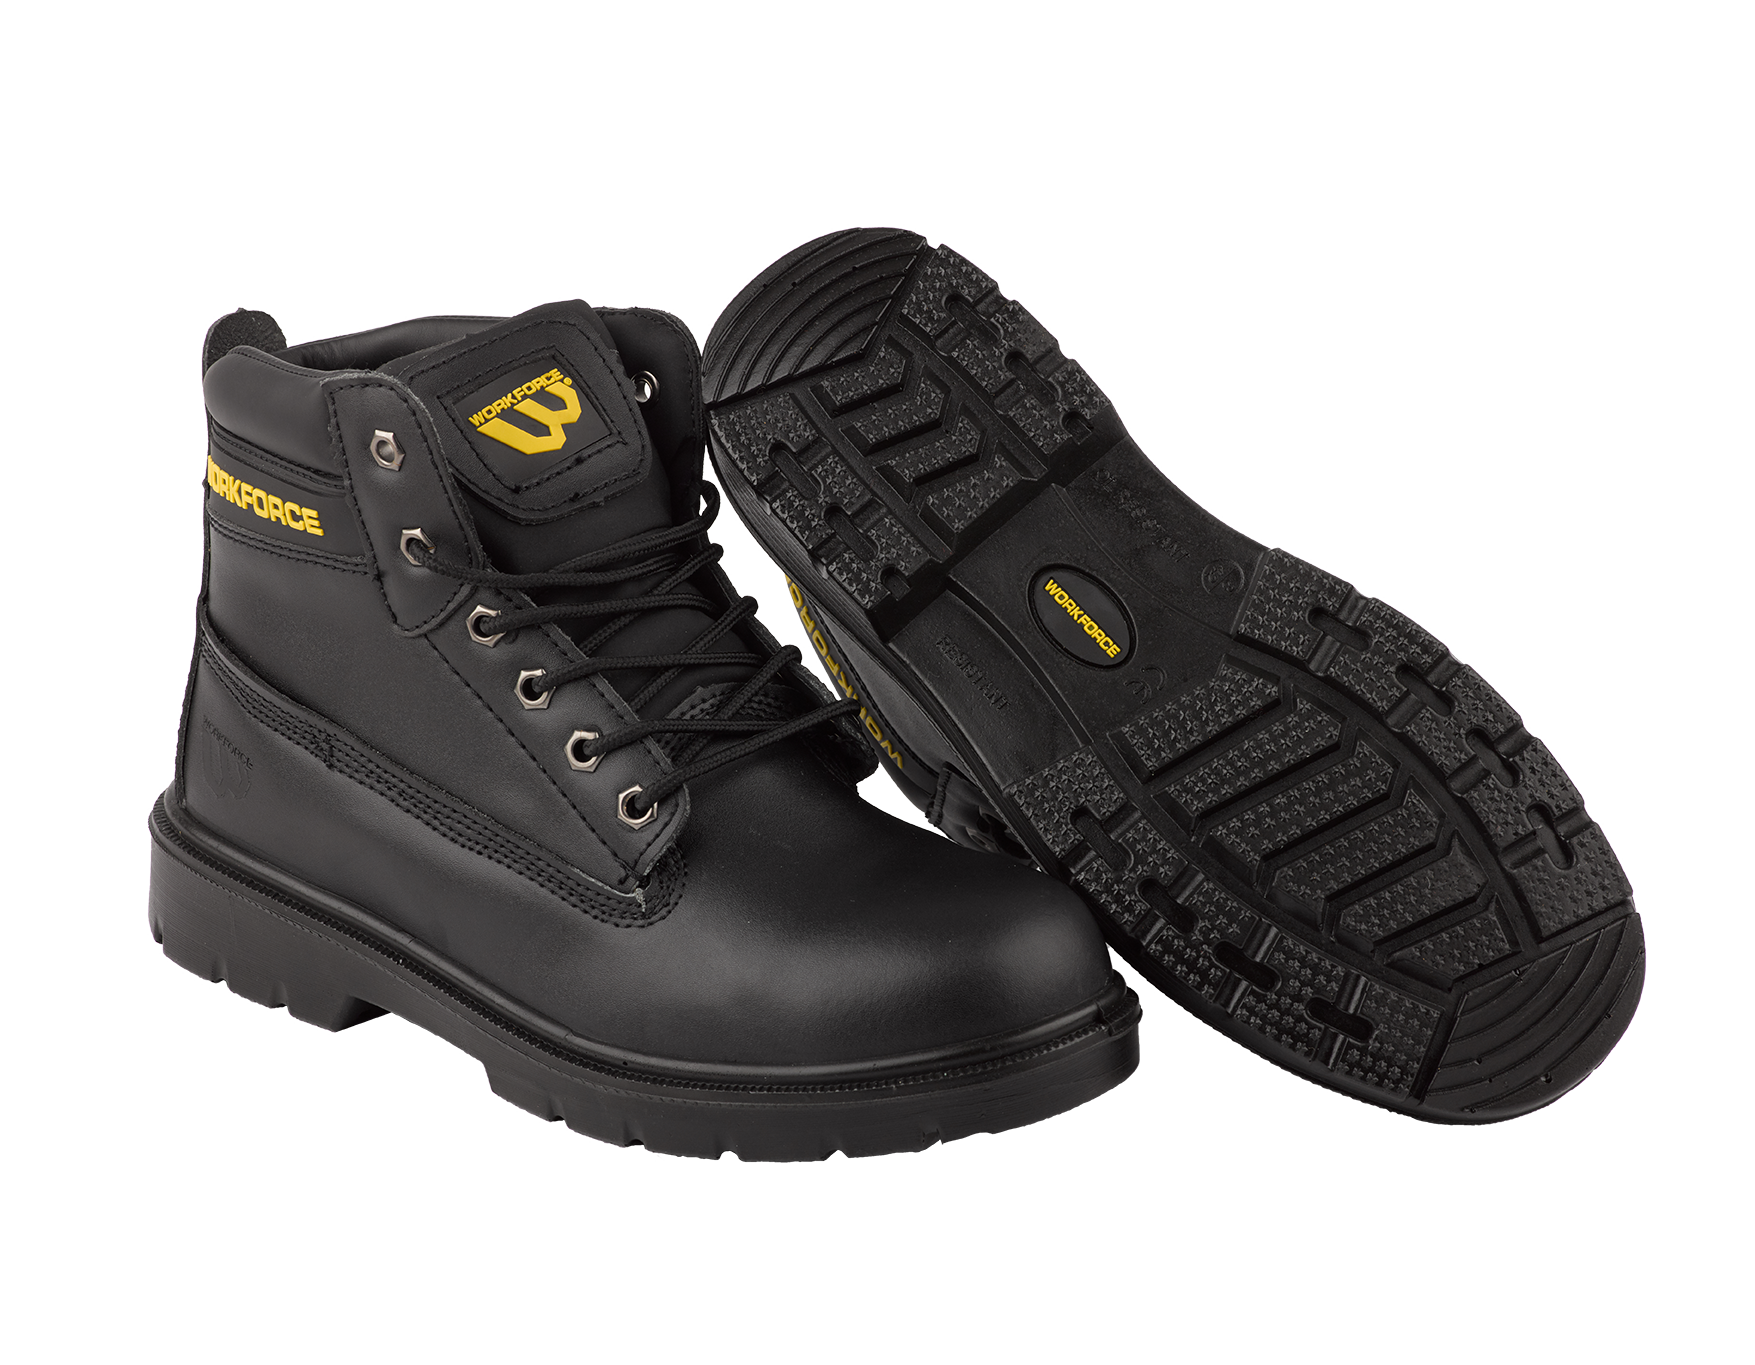 WORKFORCE BLACK LEATHER SAFETY BOOT S1P CLASSIC STYLE WITH MODERN SAFETY (WF302)